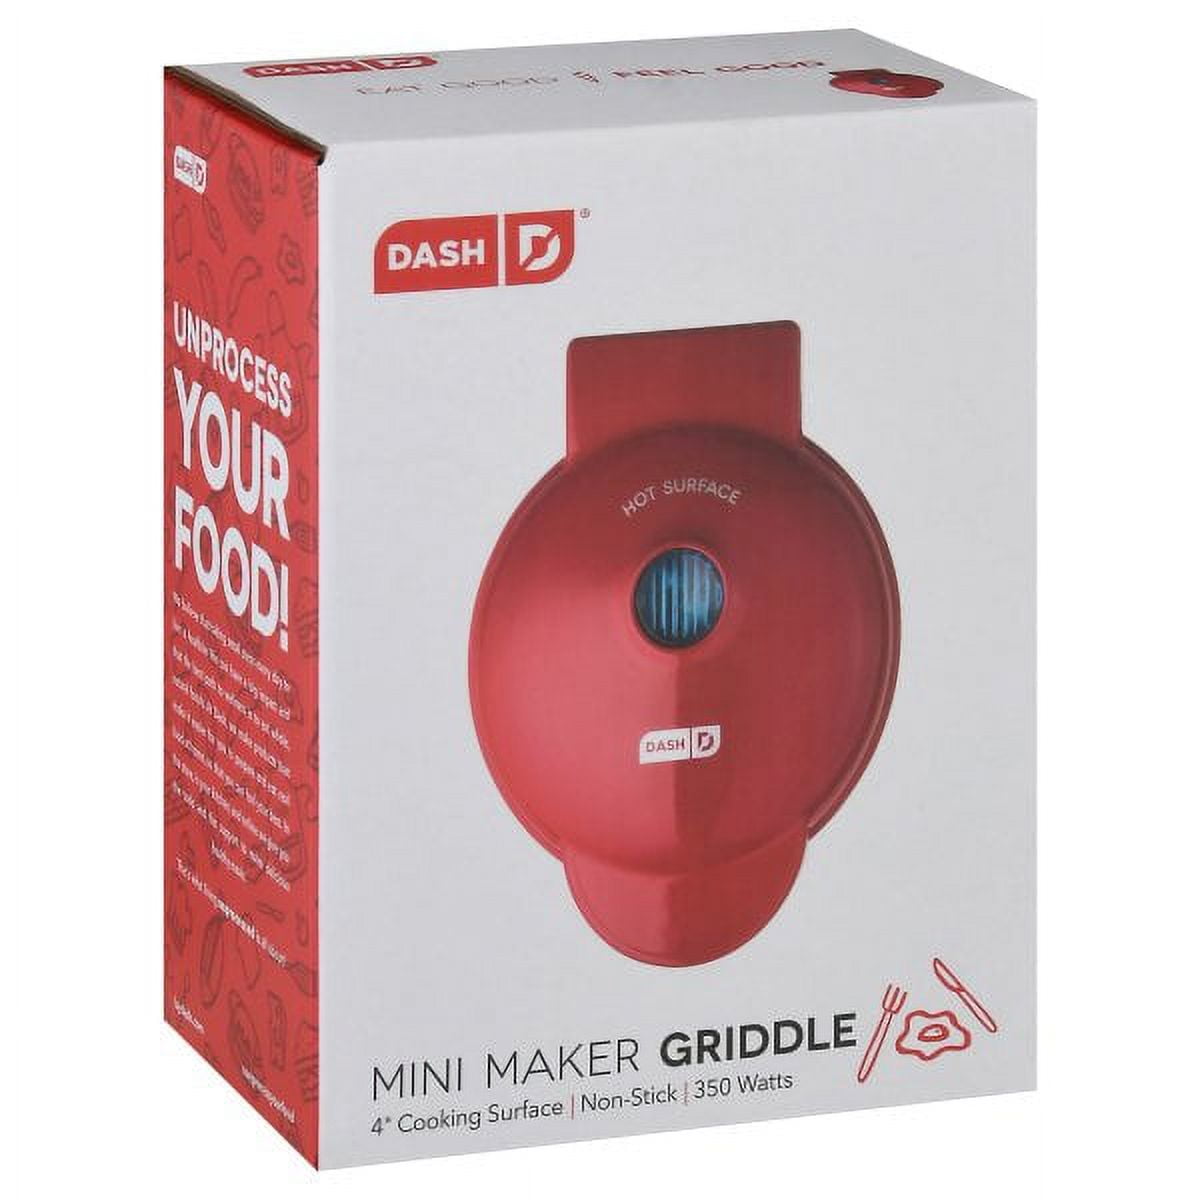  DASH Mini Waffle Maker + Grill + Griddle, 3 in 1 Pack -  Red/Aqua/White: Home & Kitchen